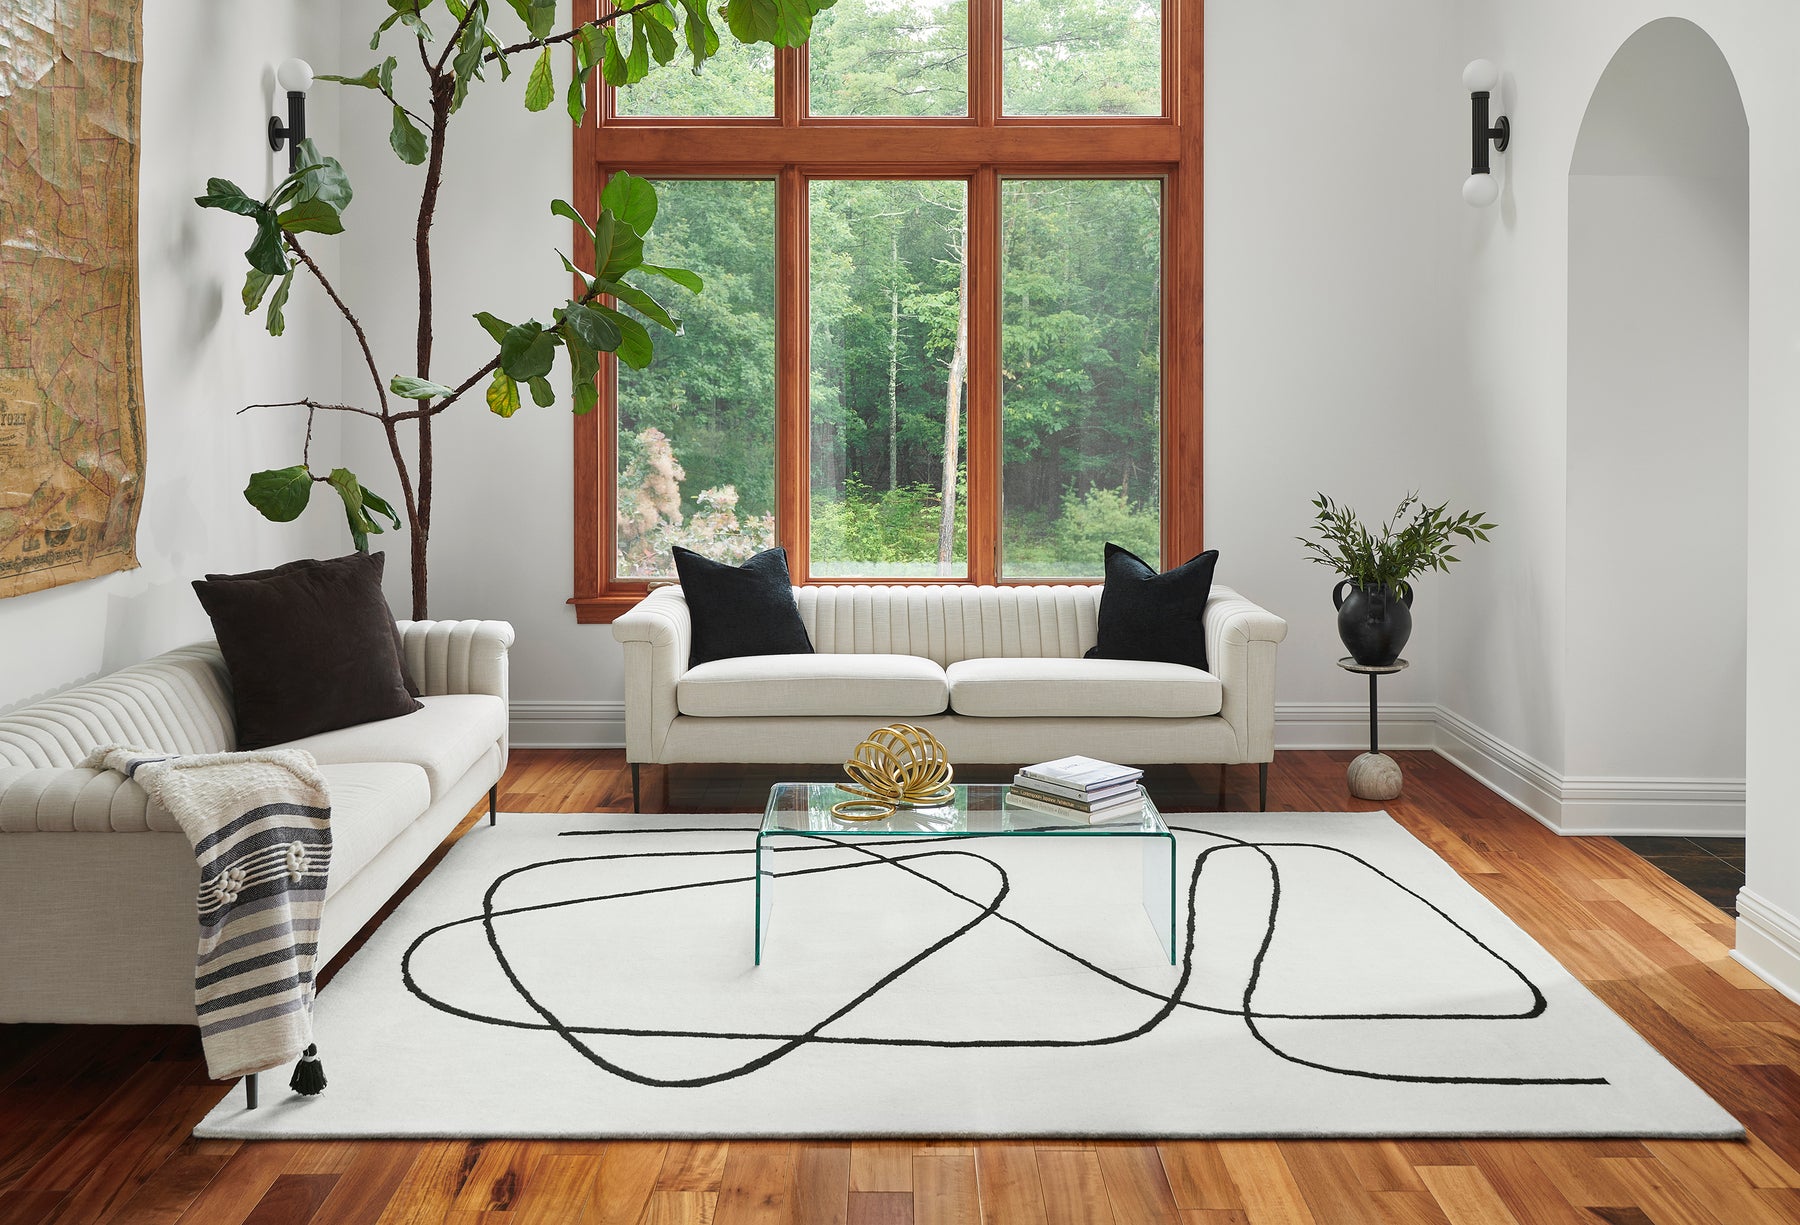 The 5 Most Durable Rugs for High Traffic Areas - Living Rooms, Dining Rooms, Corridors and Entryways